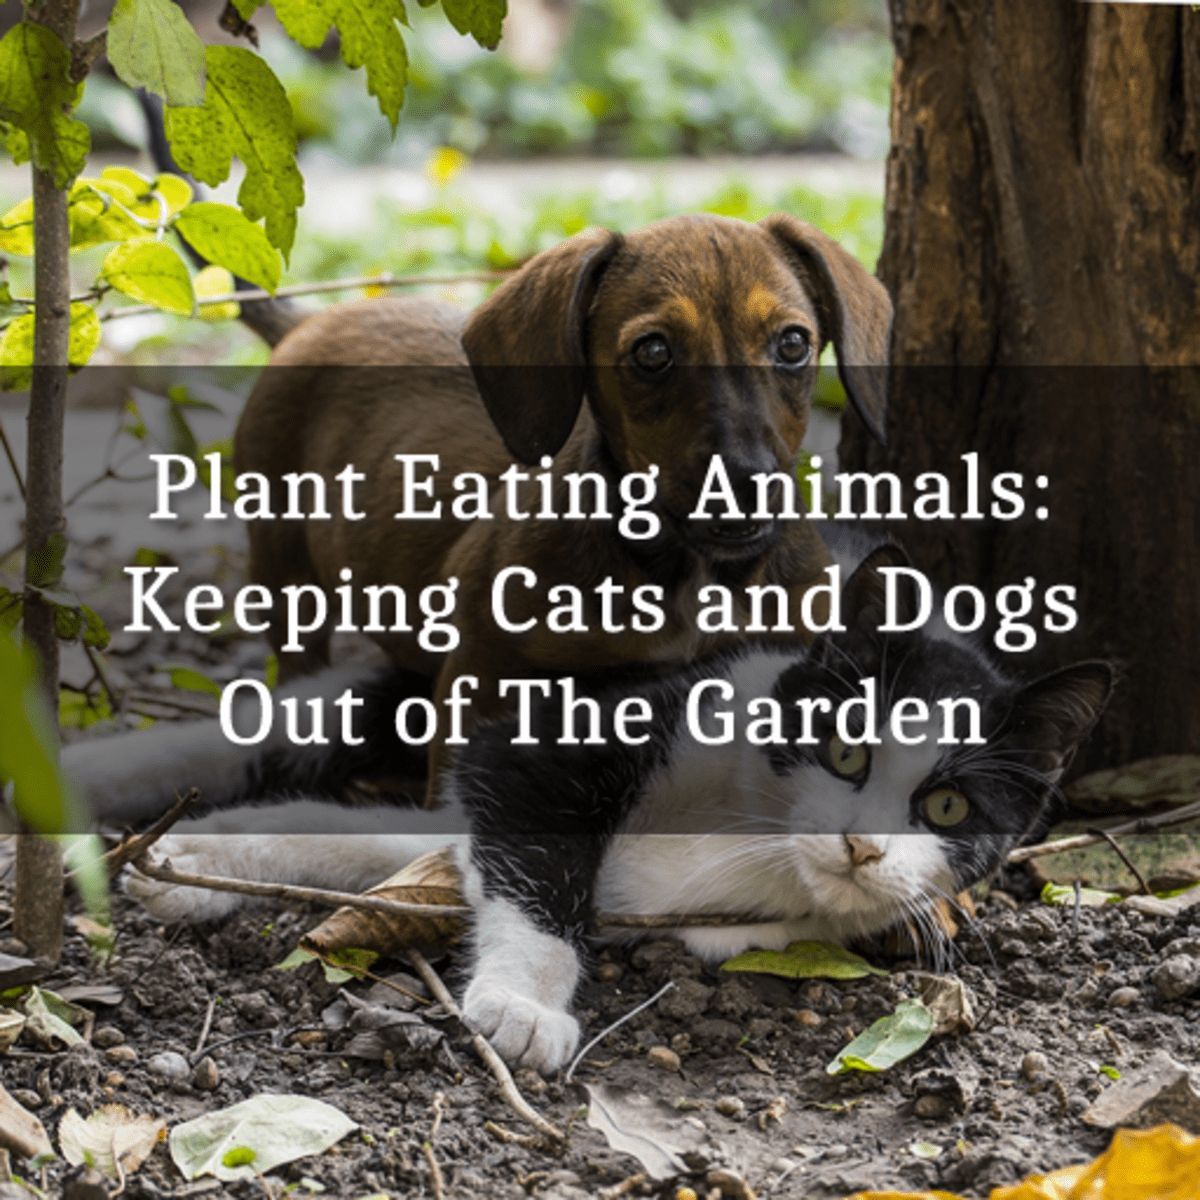 Plant-Eating Animals: Keeping Cats and Dogs Out of the Garden - HubPages